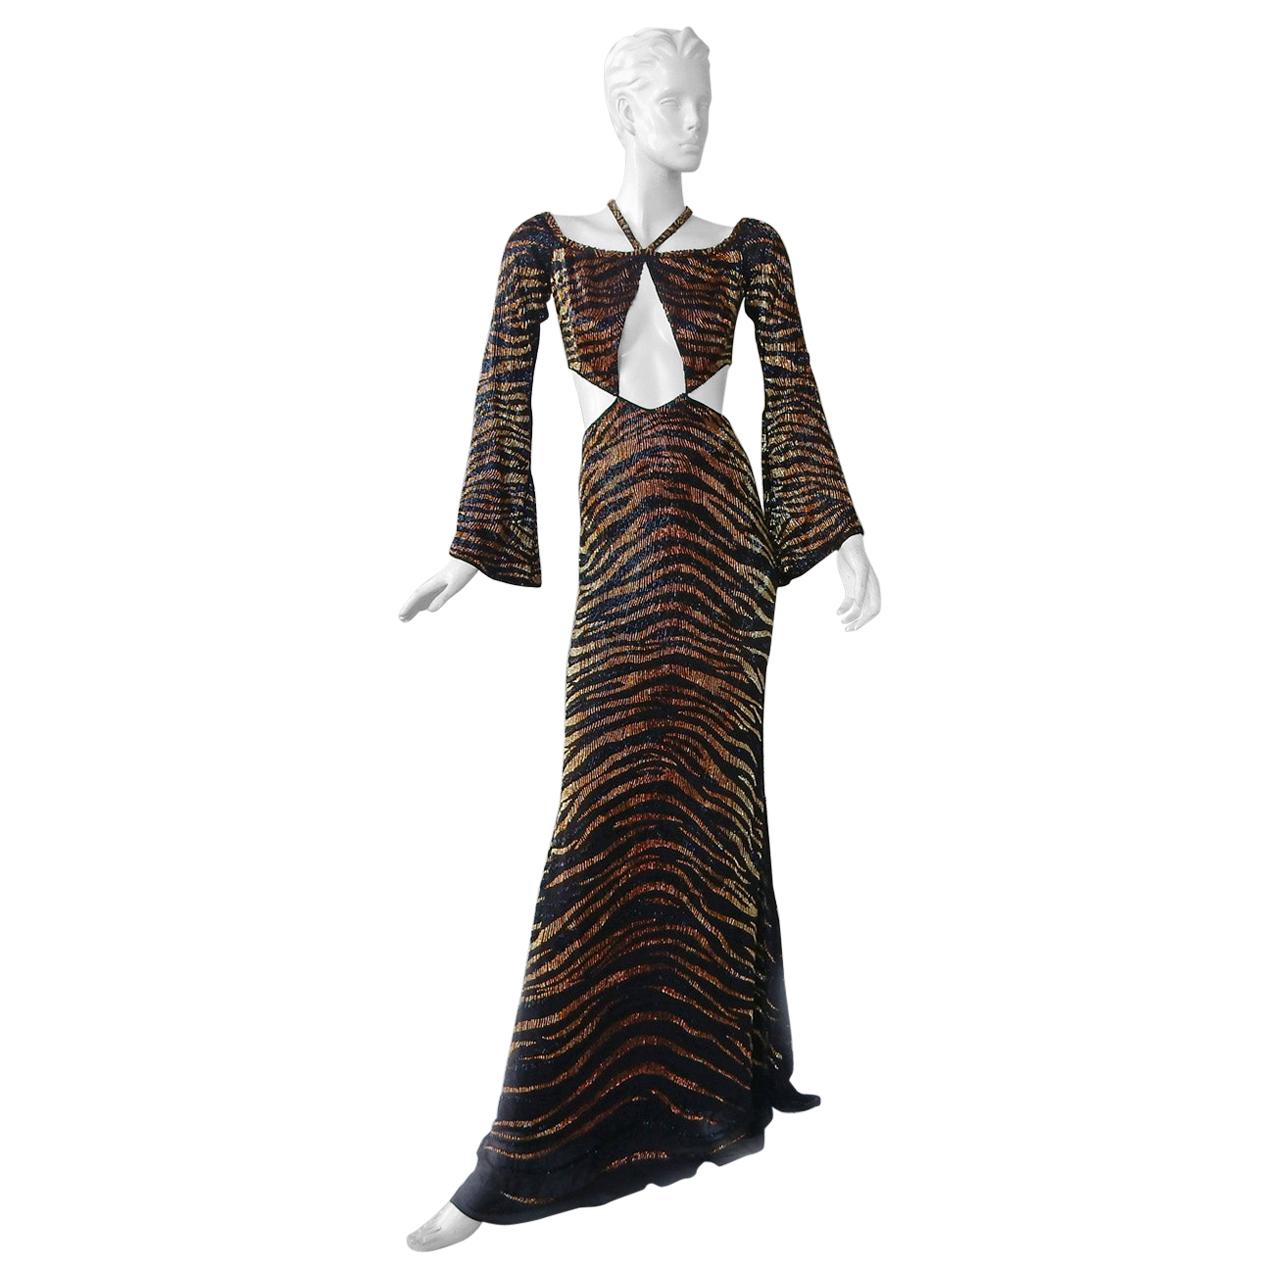 NWT $10.5K Roberto Cavalli Cut-Out Beaded Tiger Print Gown Dress For Sale